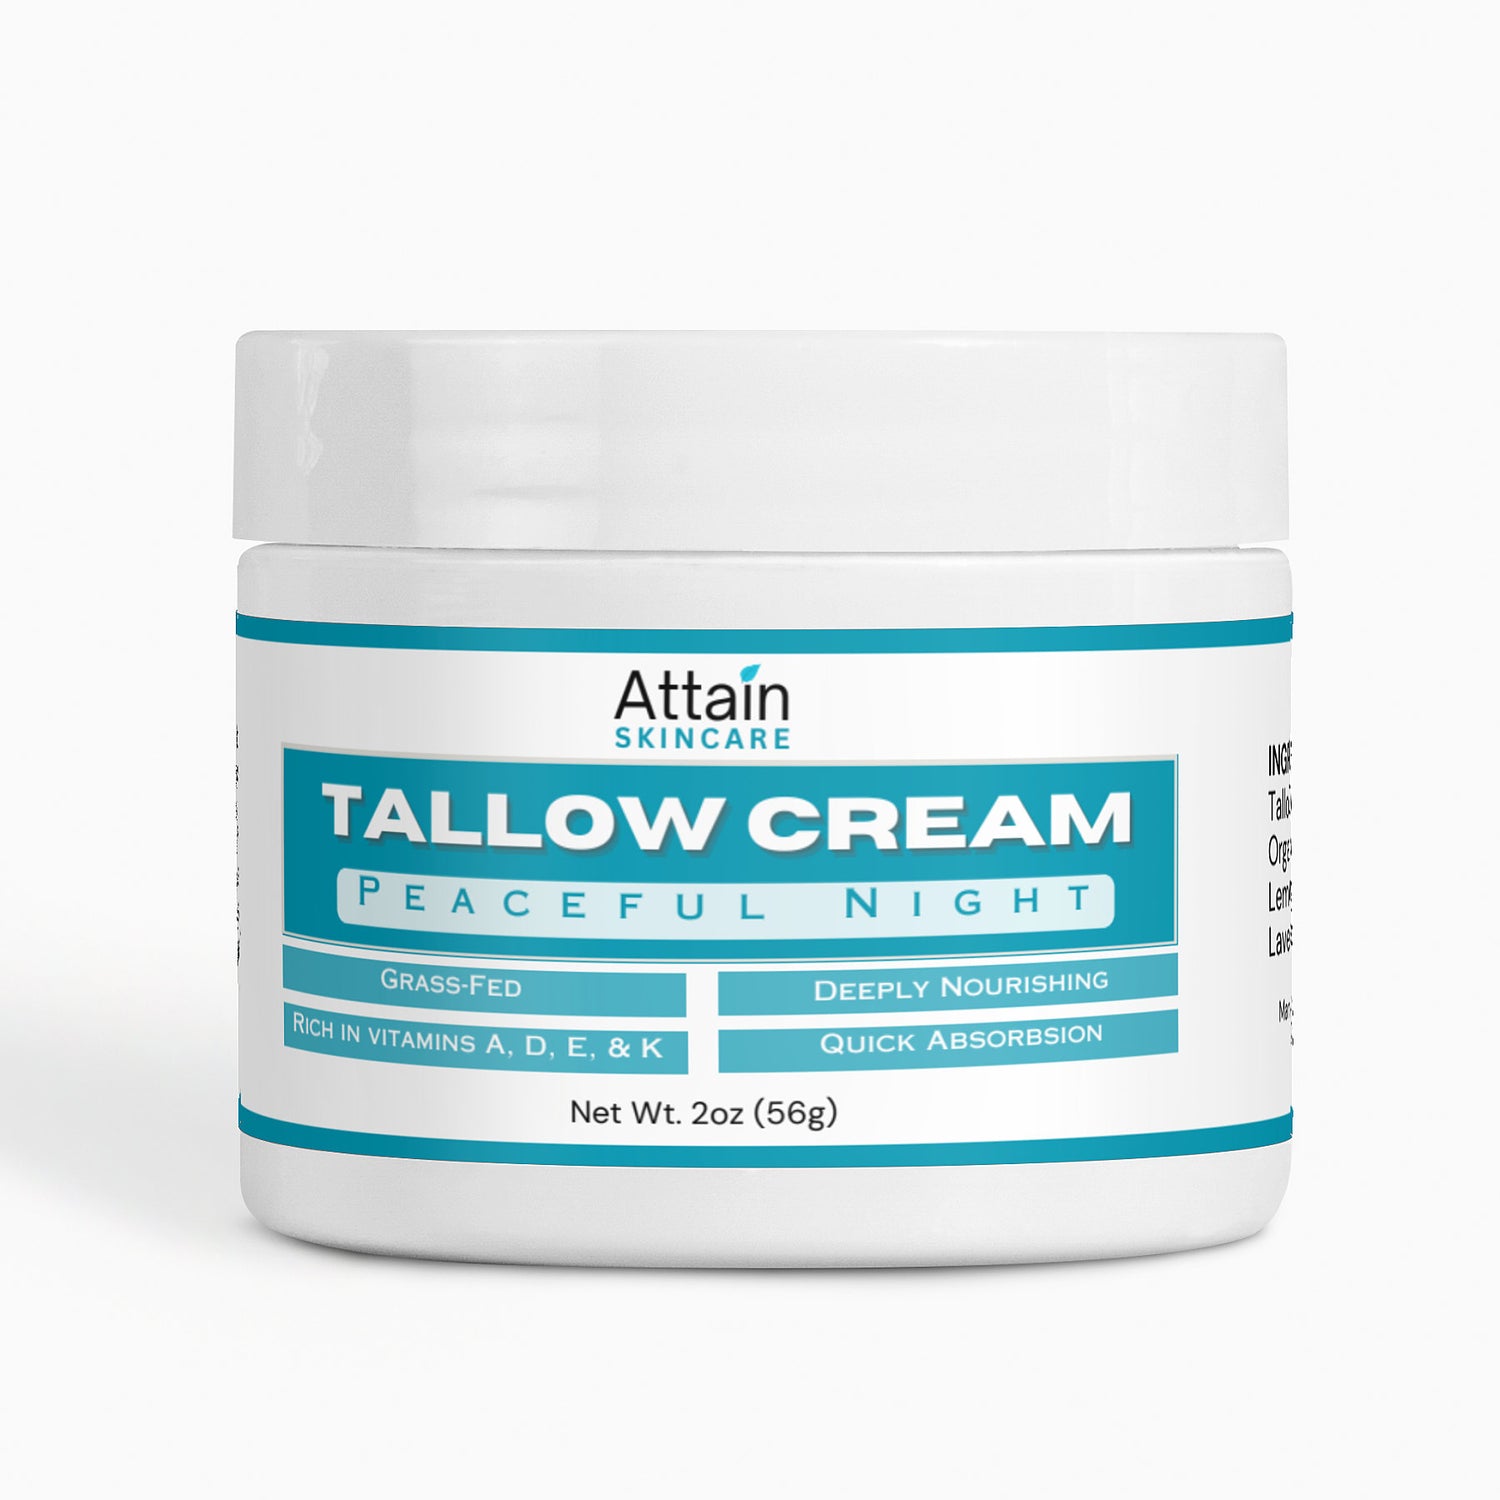 Tallow Cream - Peaceful Night scent - Made from Grass fed Beef Tallow - Attain Supplements